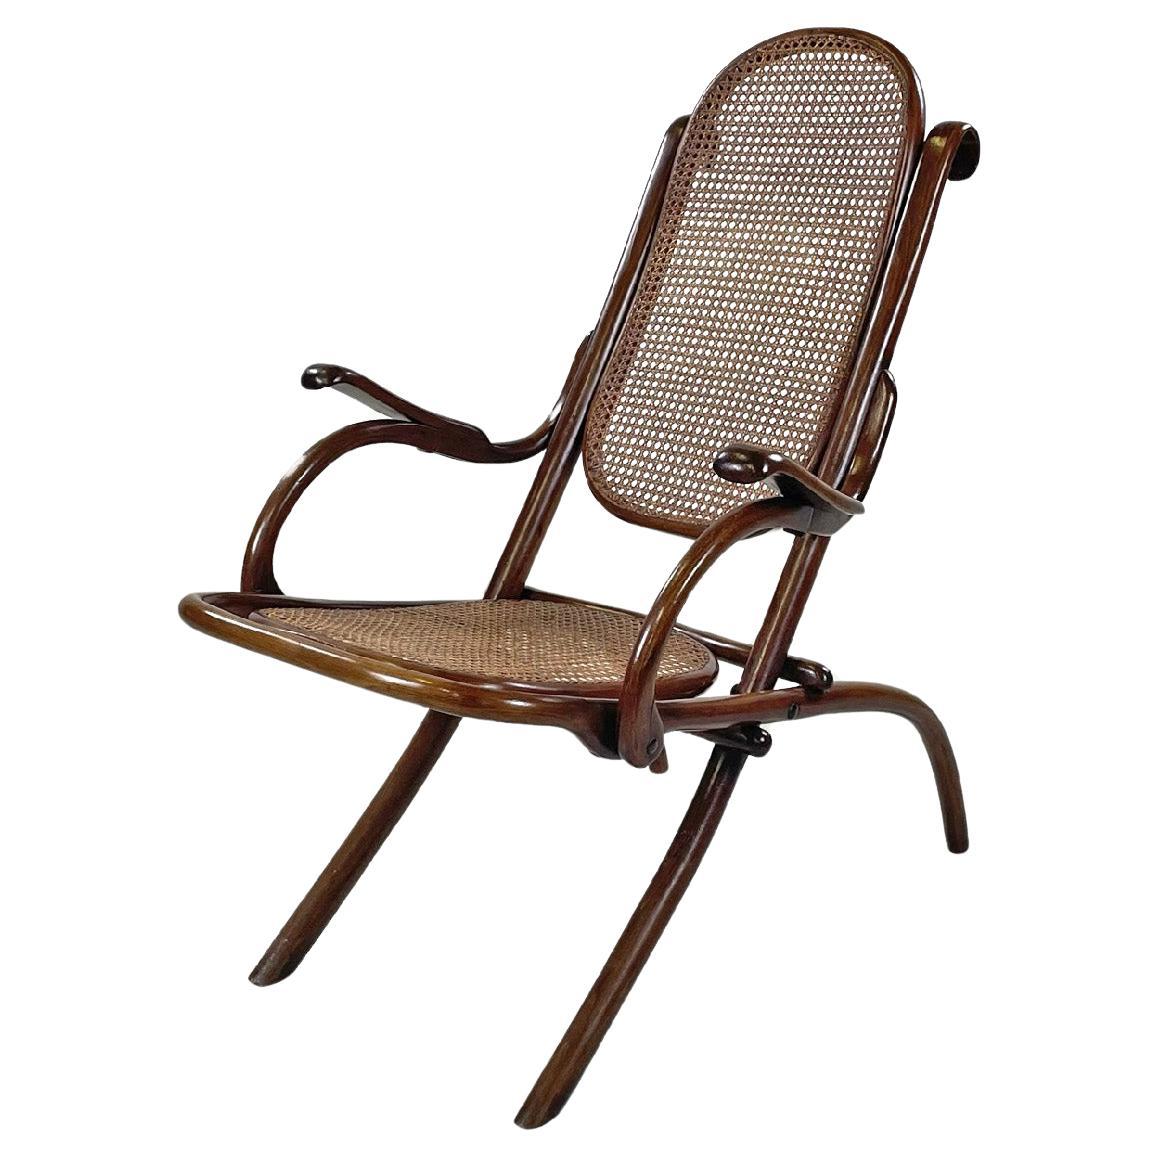 Austrian wooden foldable Thonet armchair with Vienna straw, late 1800s